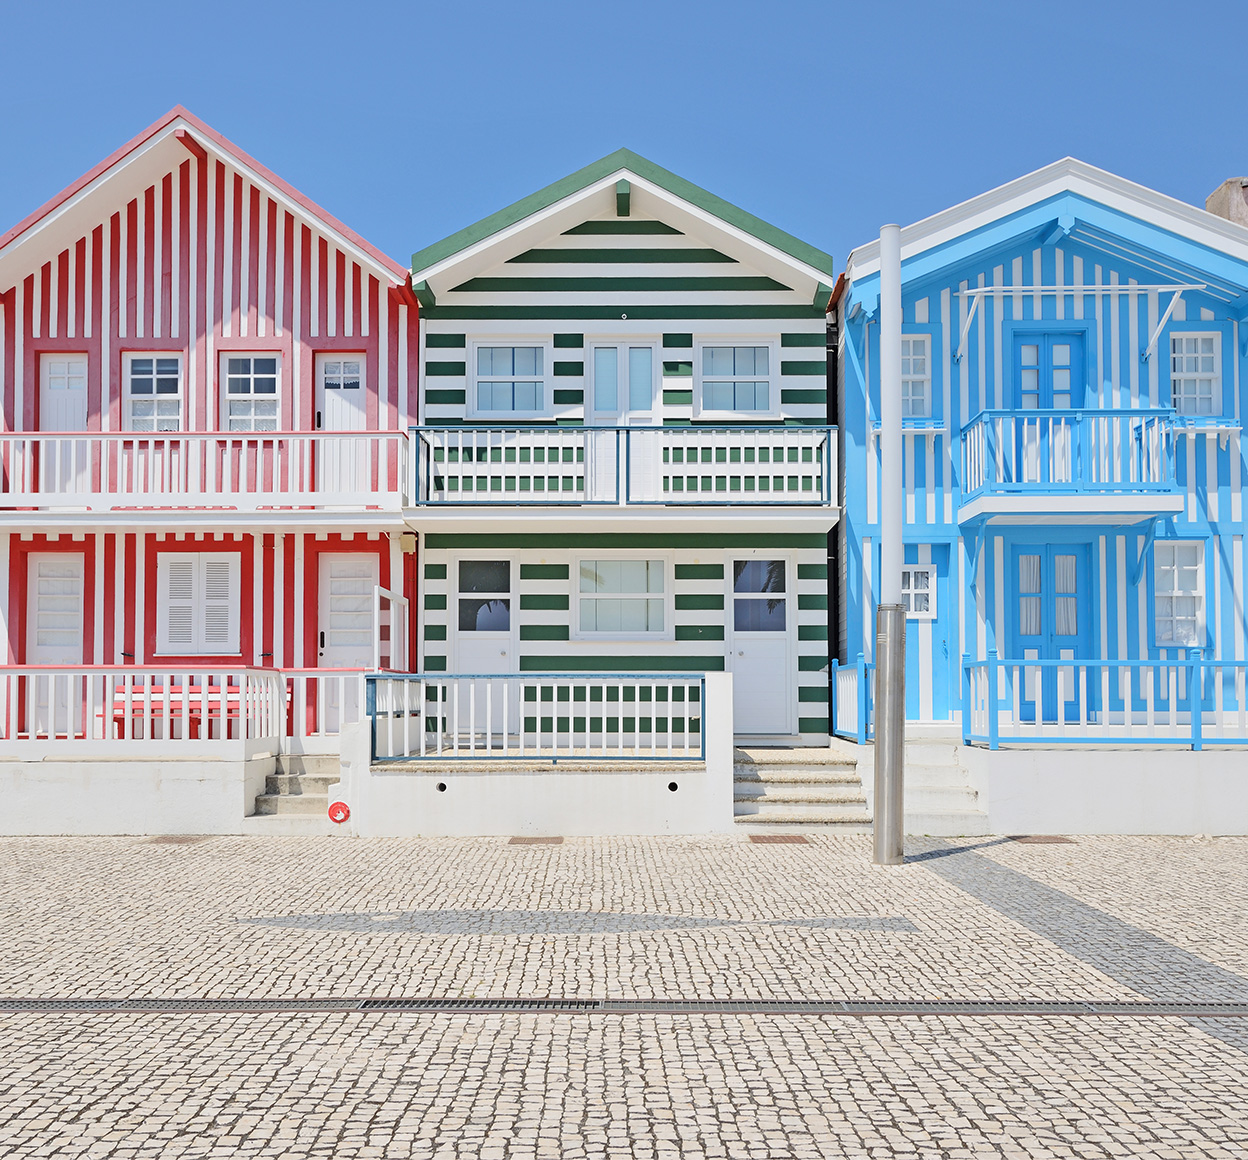 Colorful houses in Aveiro, Portugal